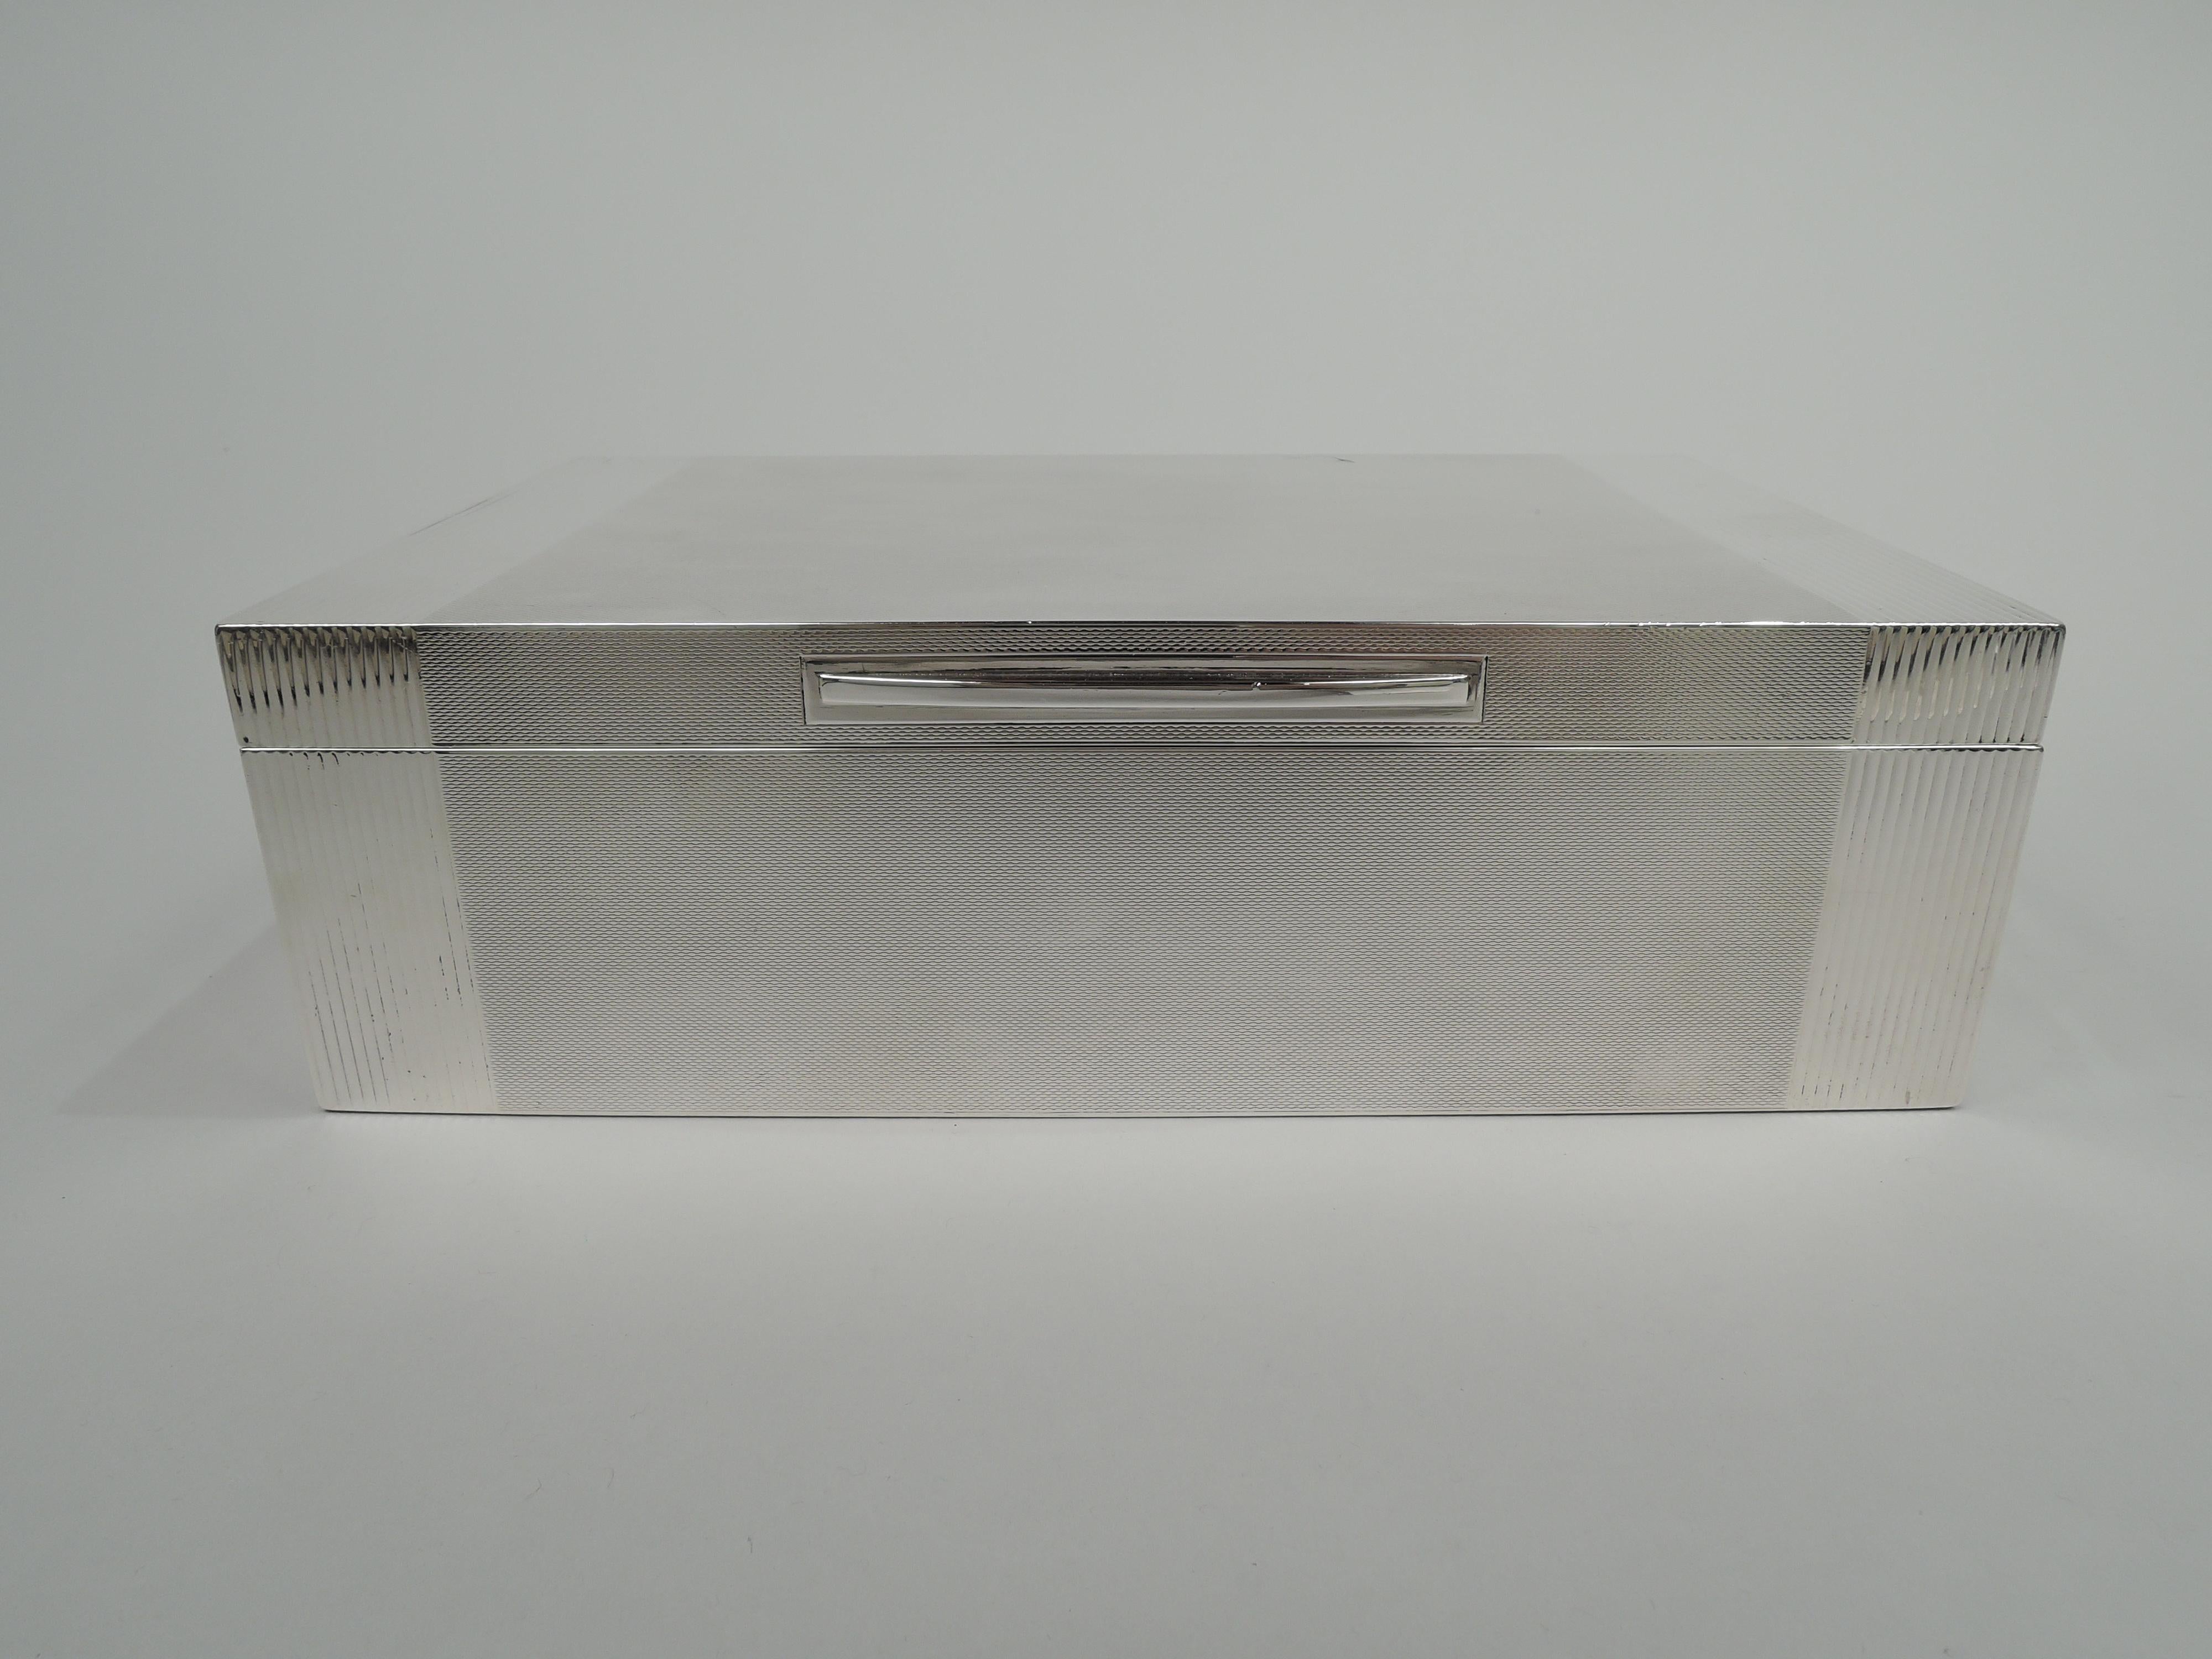 English Art Deco sterling silver box, 1949. Rectangular with straight sides and crisp corner. Cover hinged and flat with tapering tab on plain rectilinear frame. All over engine-turning with reeded bands that wrap around from front to back. Box ends